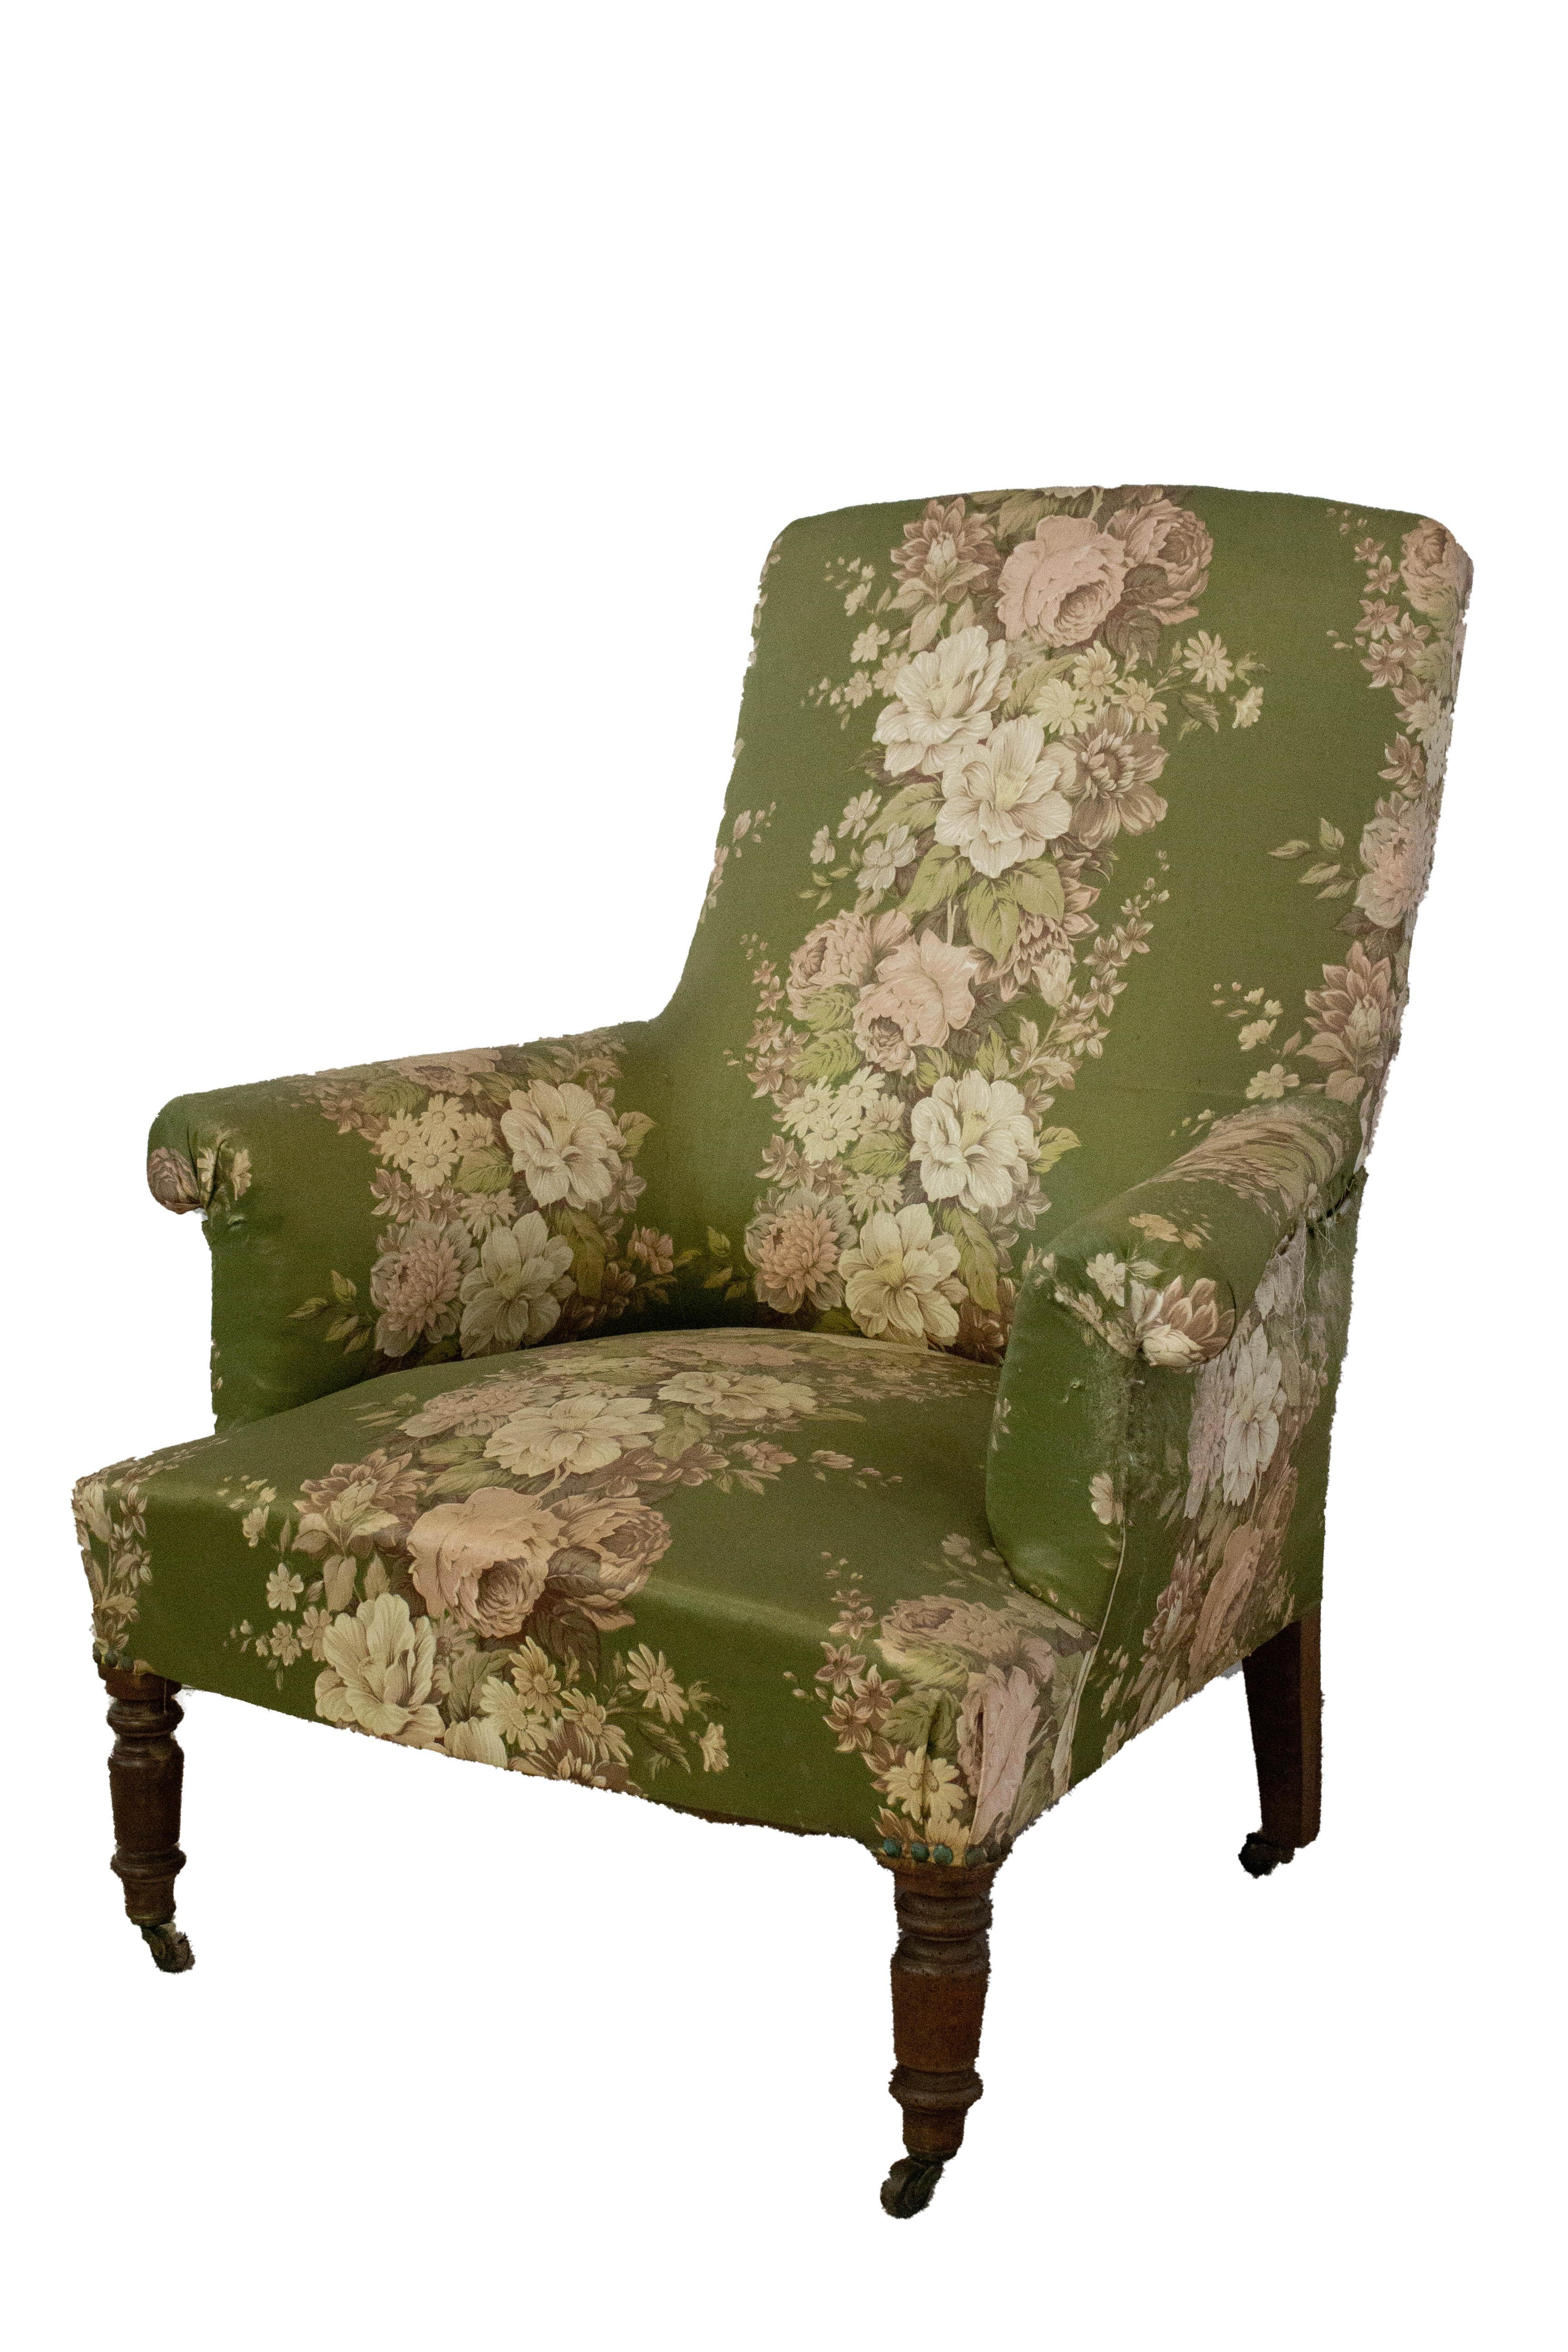 Armchair bergère French Napoleon III, circa 1890
Antique 19th century
Original casters
To recover in fabric of your choice to suit your interior
Sound and solid upholstery good with only minor revisions
Very comfortable.
 
 